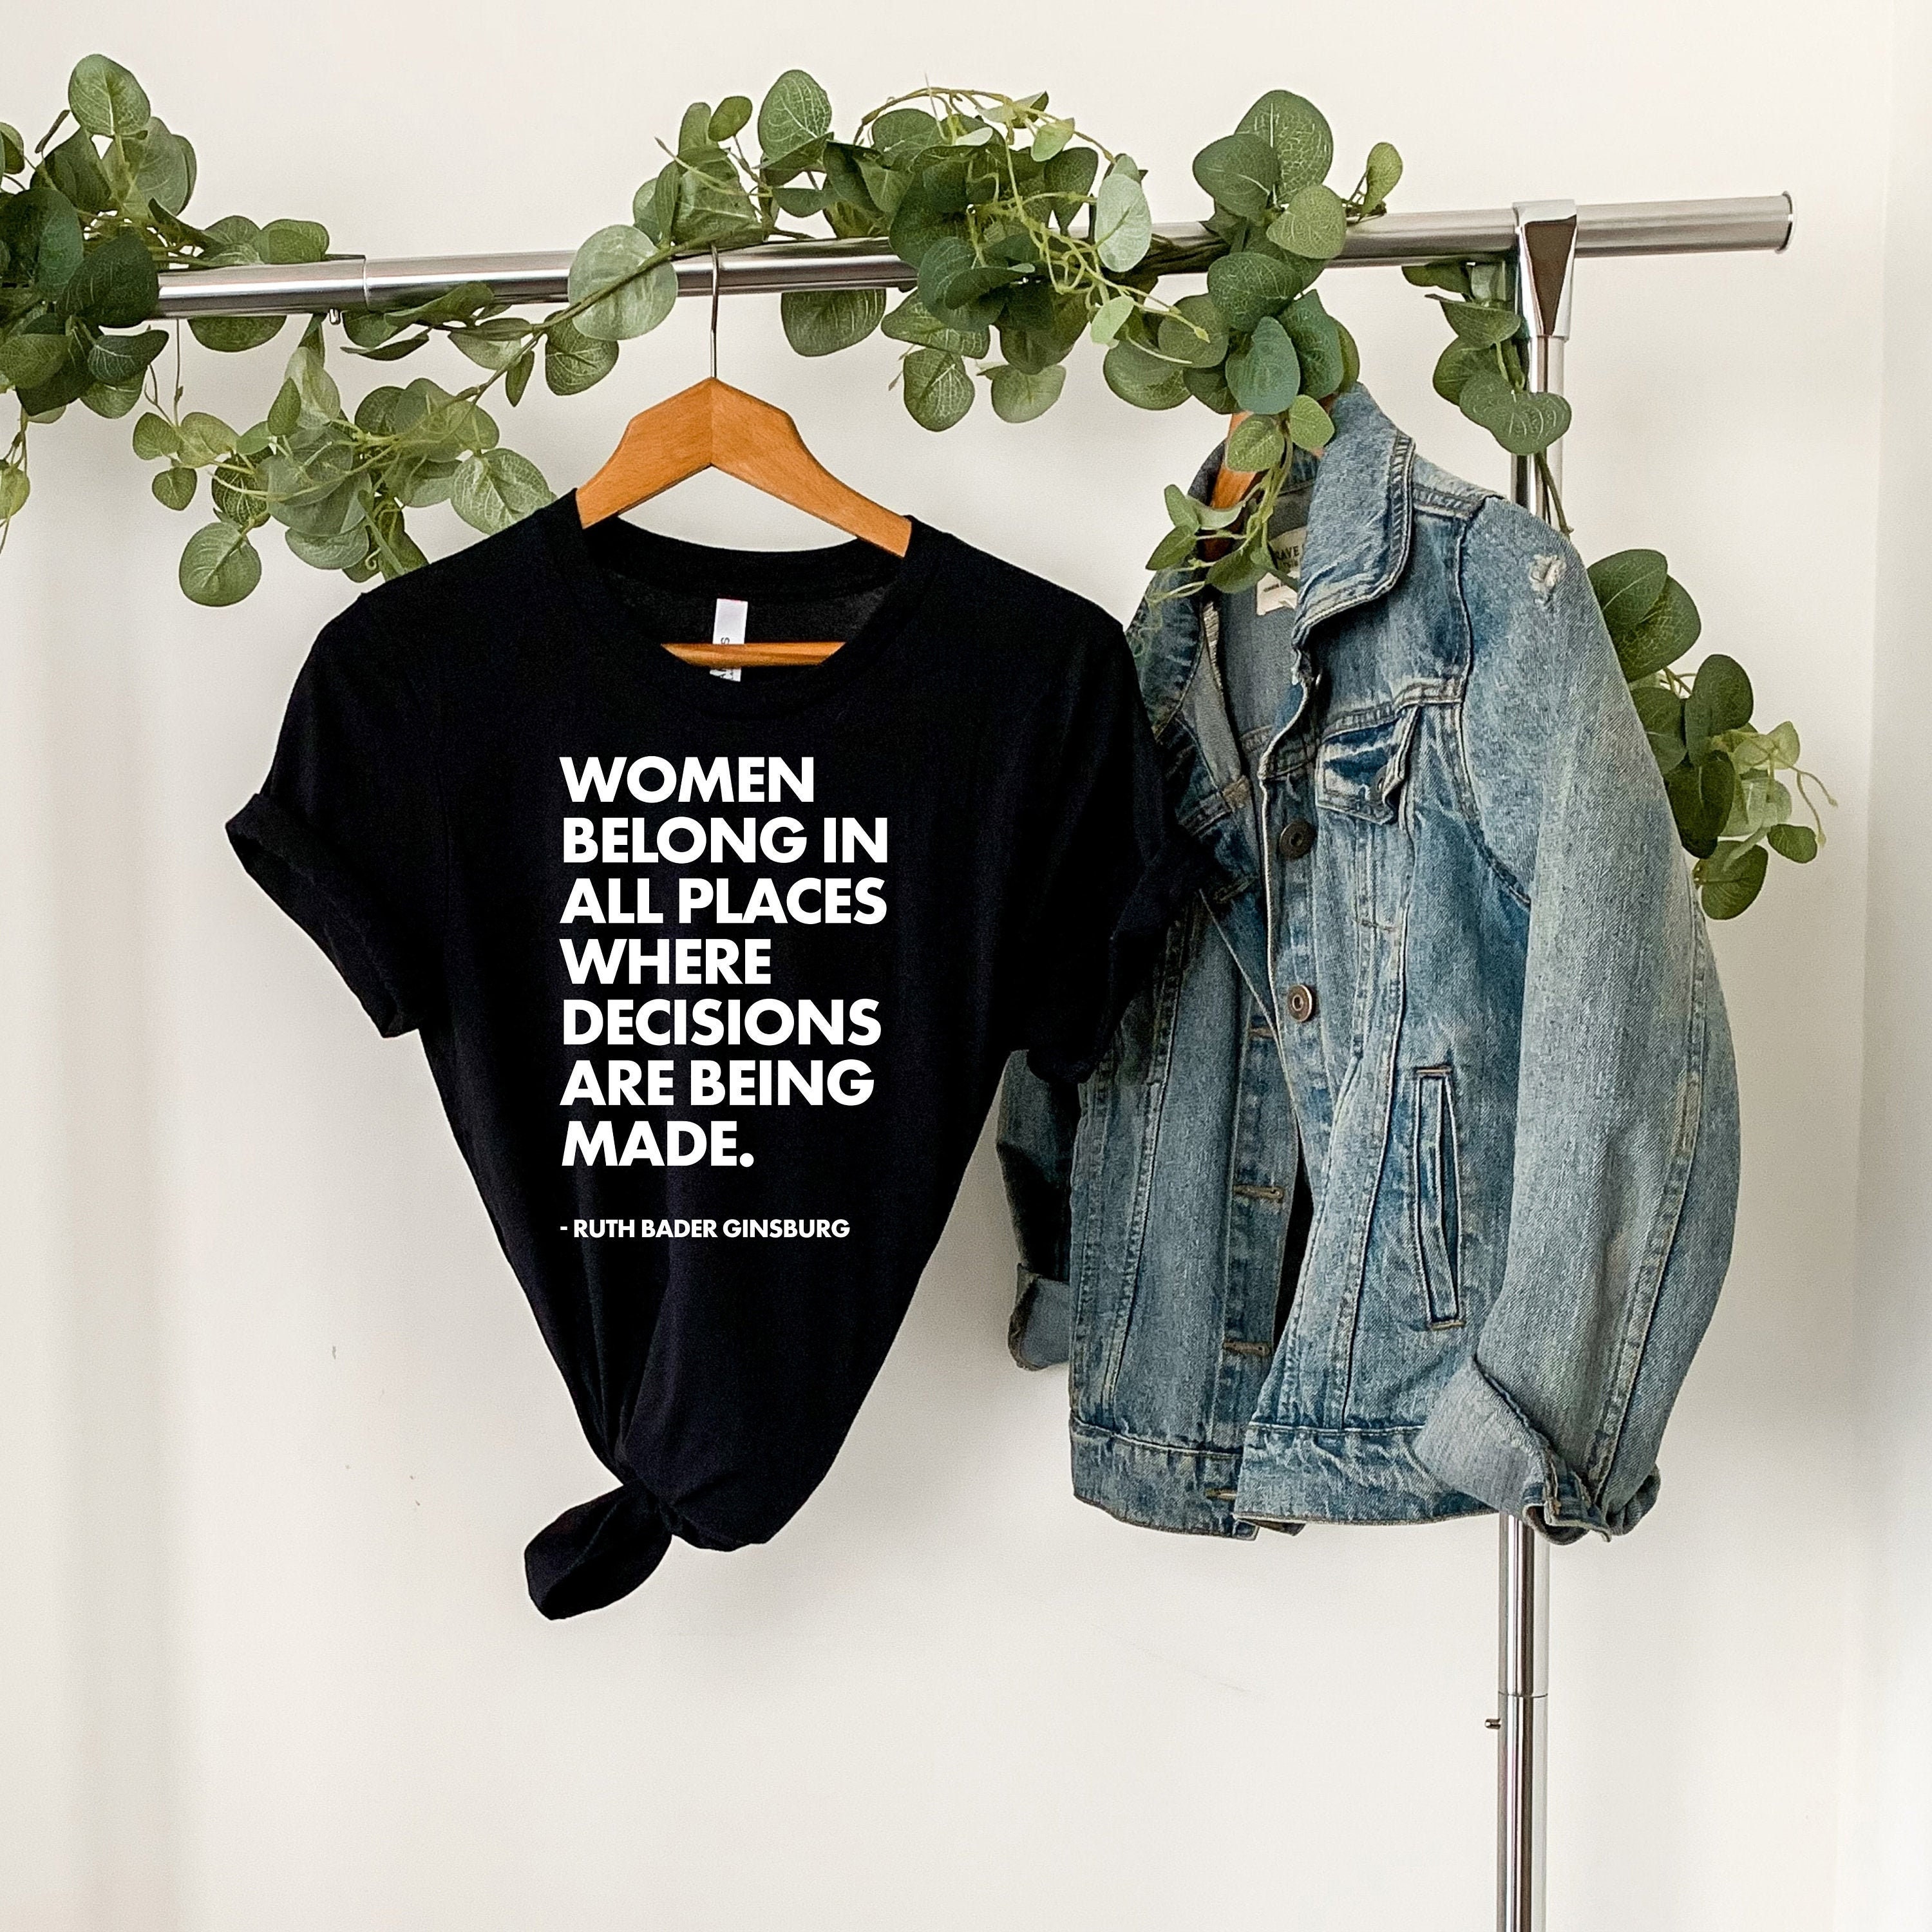 notorious RBG long sleeve tee women's belong in all places quote feminist tee equality shirt Girl power Gift Ruth Bader Ginsburg shirt